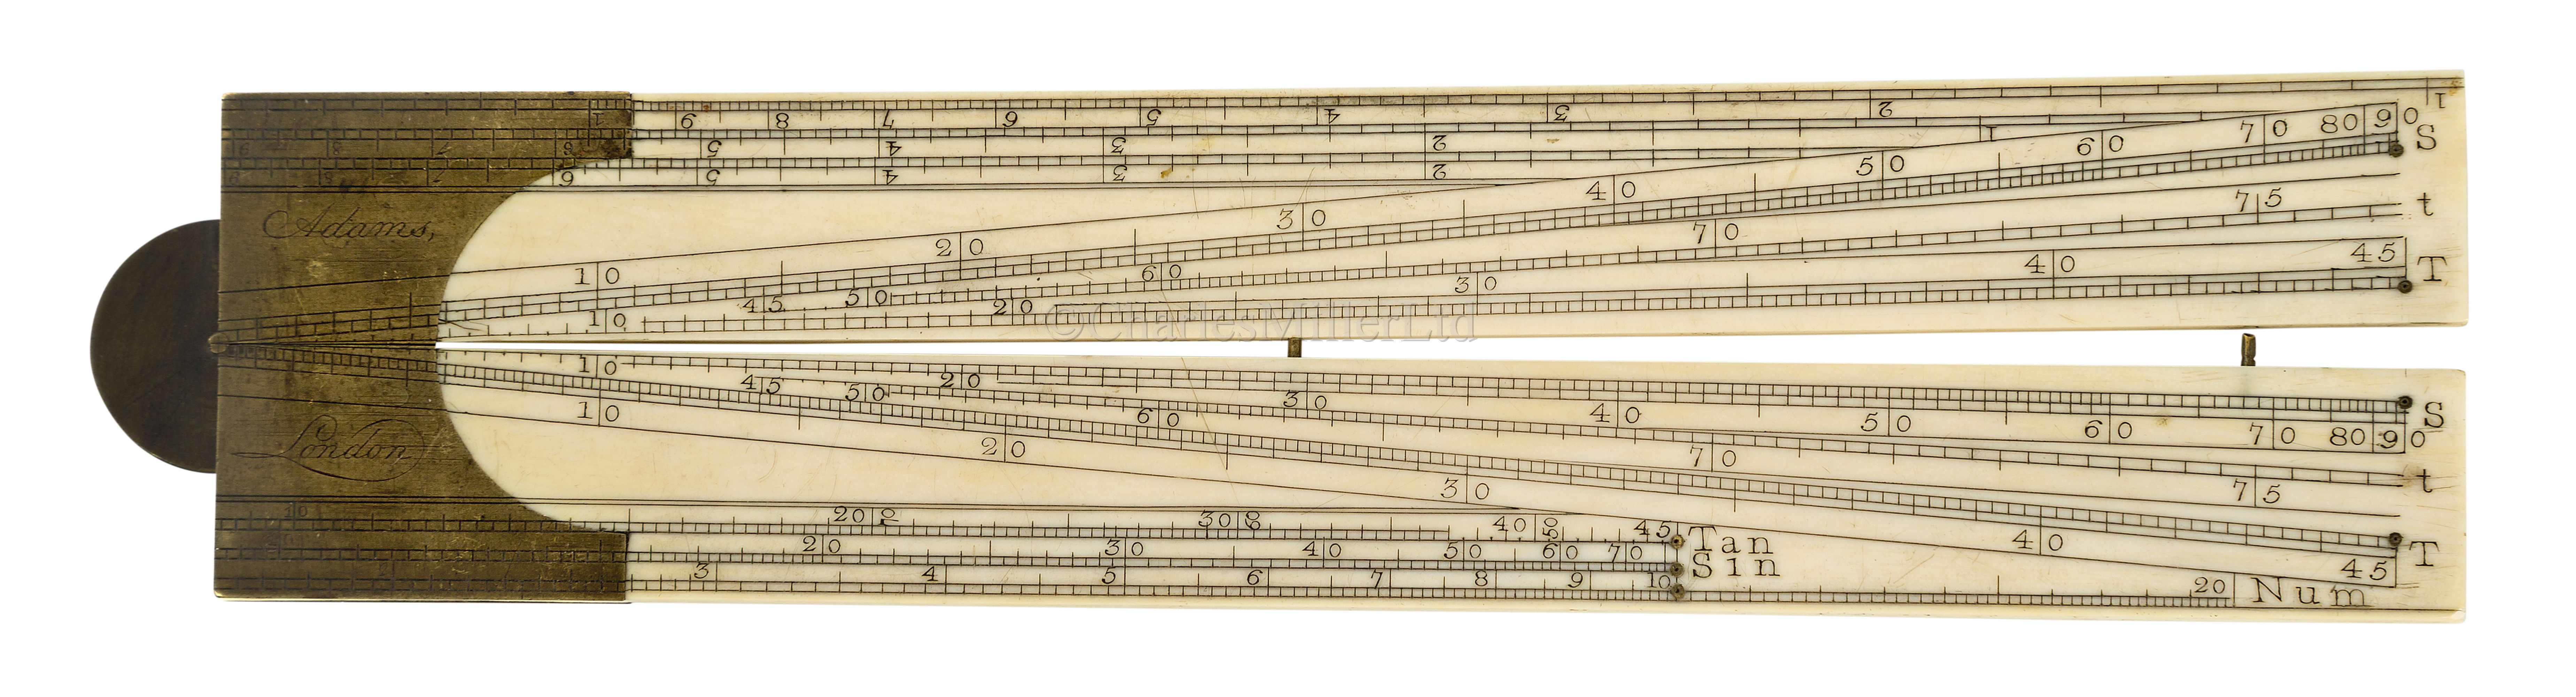 Ø A FOLDING IVORY AND BRASS SECTOR BY ADAMS, LONDON, CIRCA 1790 & 4 protractors